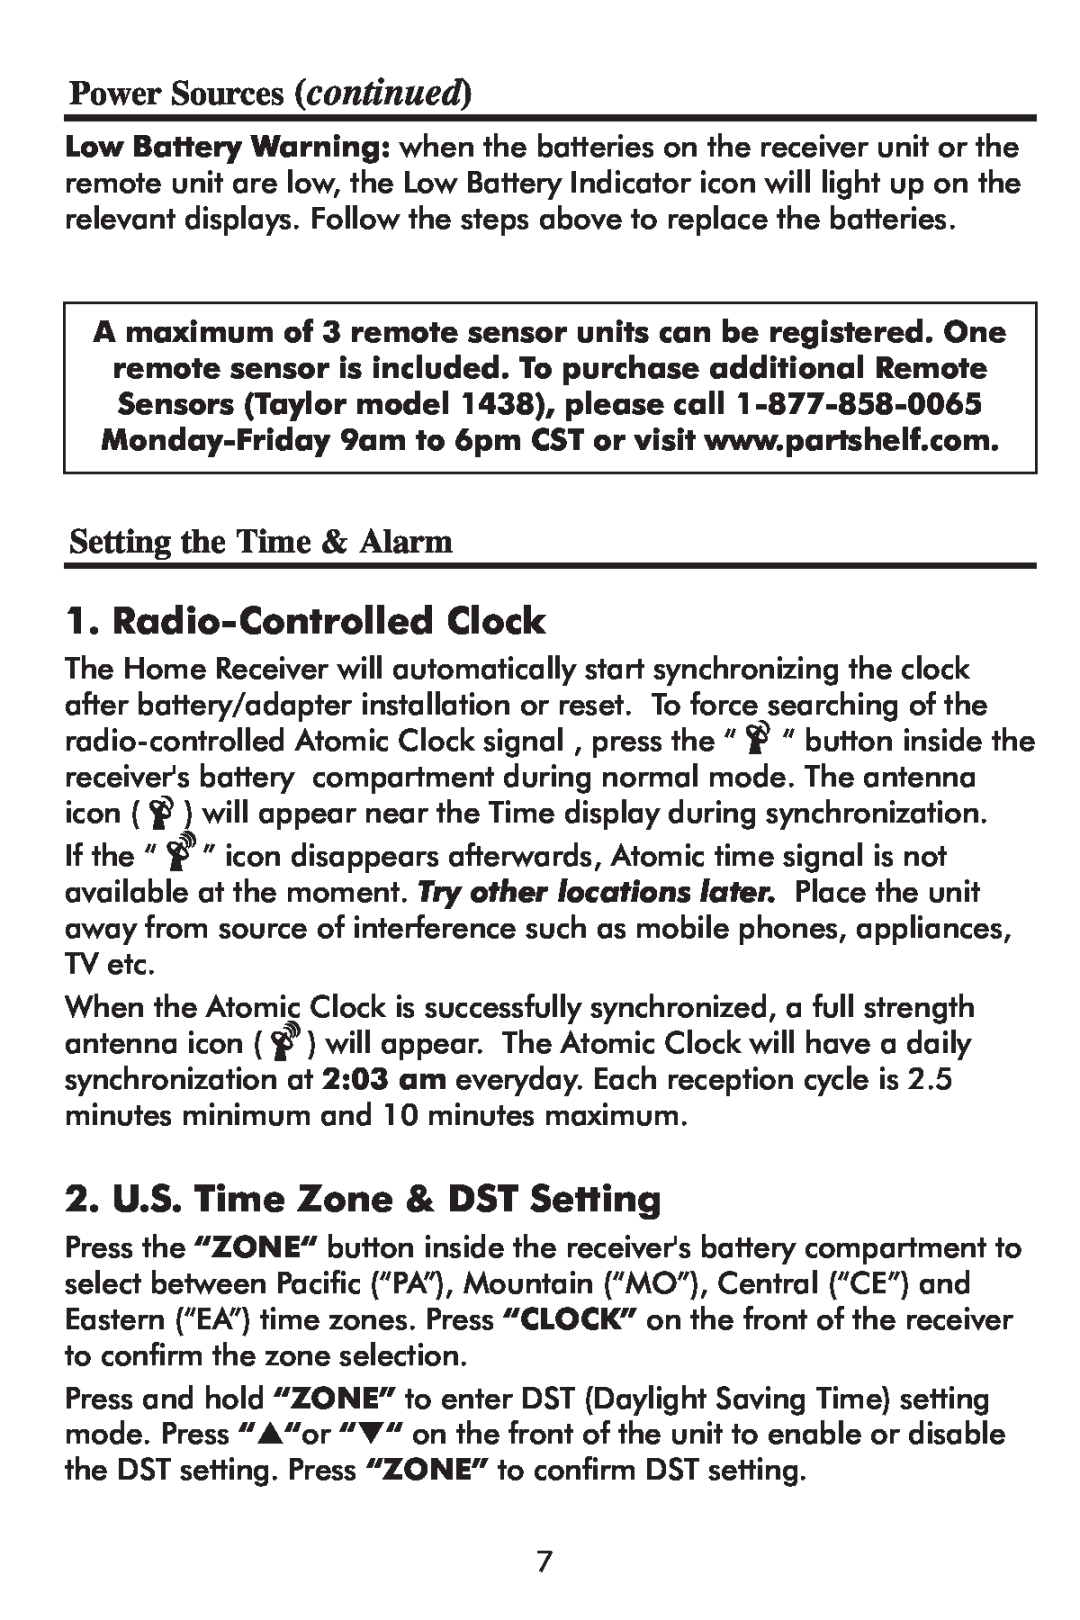 Taylor 1507 Radio-Controlled Clock, 2. U.S. Time Zone & DST Setting, Setting the Time & Alarm, Power Sources continued 